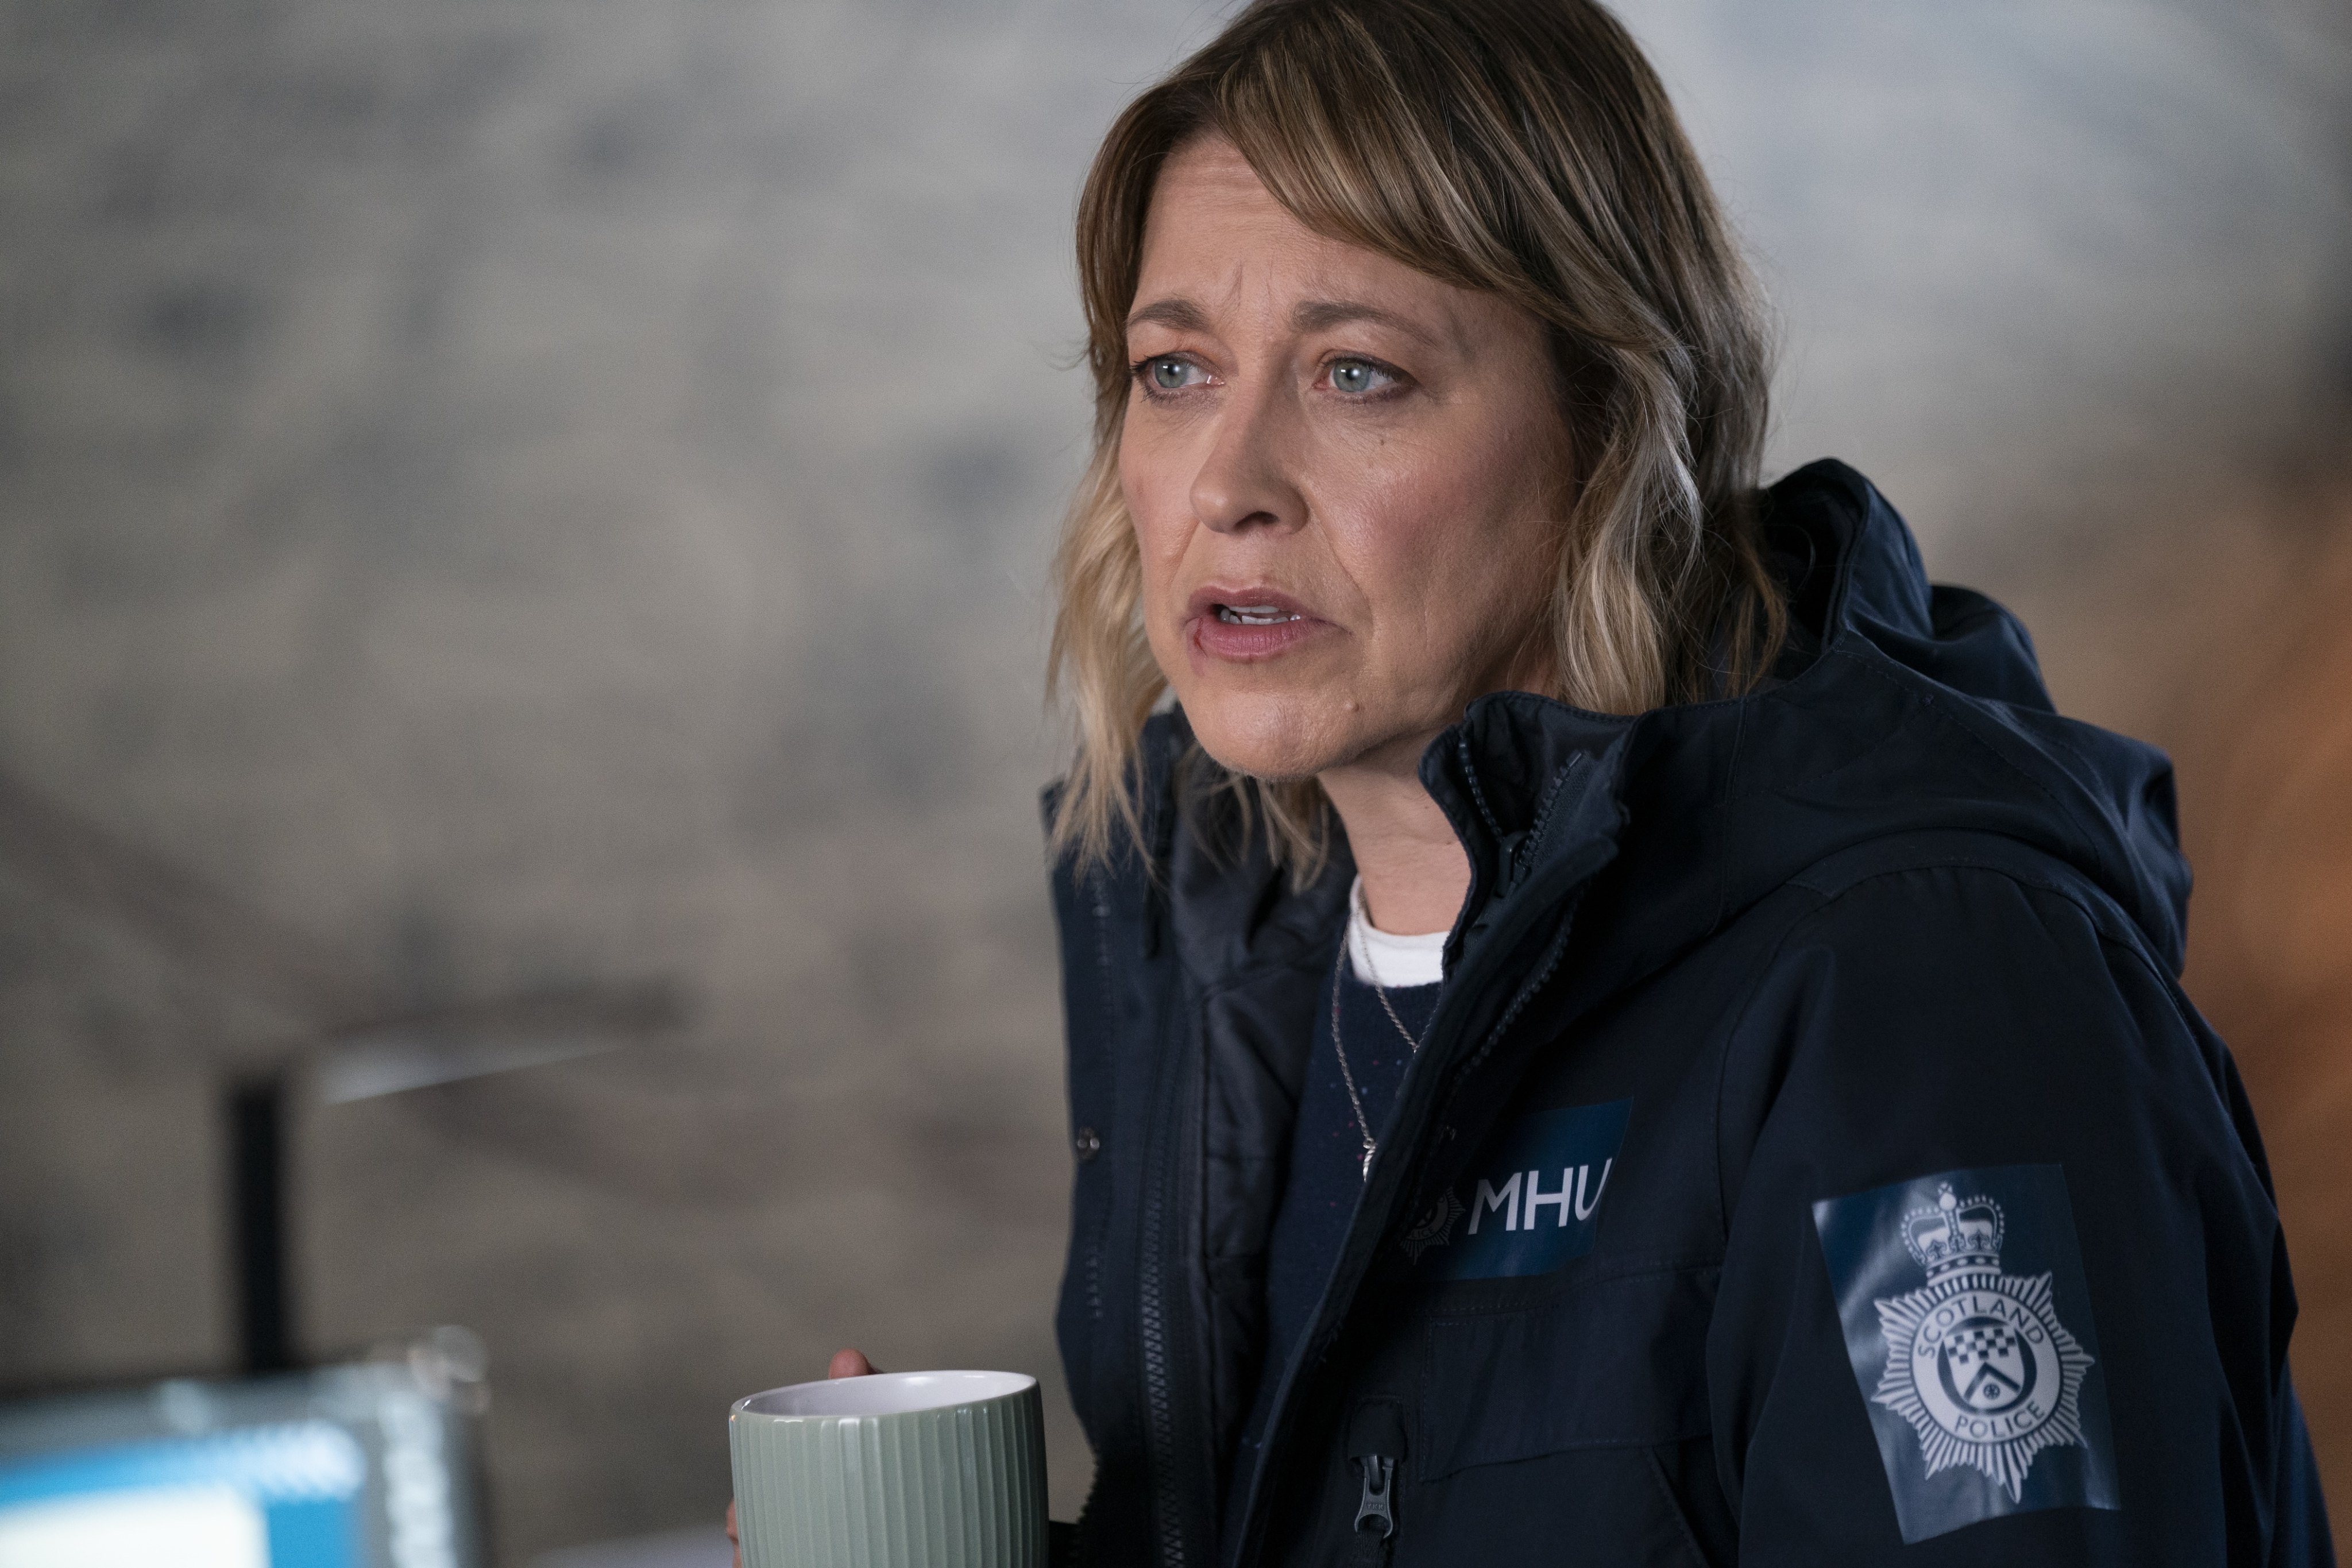 BBC First drama Annika stars Nicola Walker (above) as Detective Inspector Annika Strandhed, investigating murders around Scotland, and raising her rebellious teenage daughter. Photo: Black Camel Pictures and All3Media International